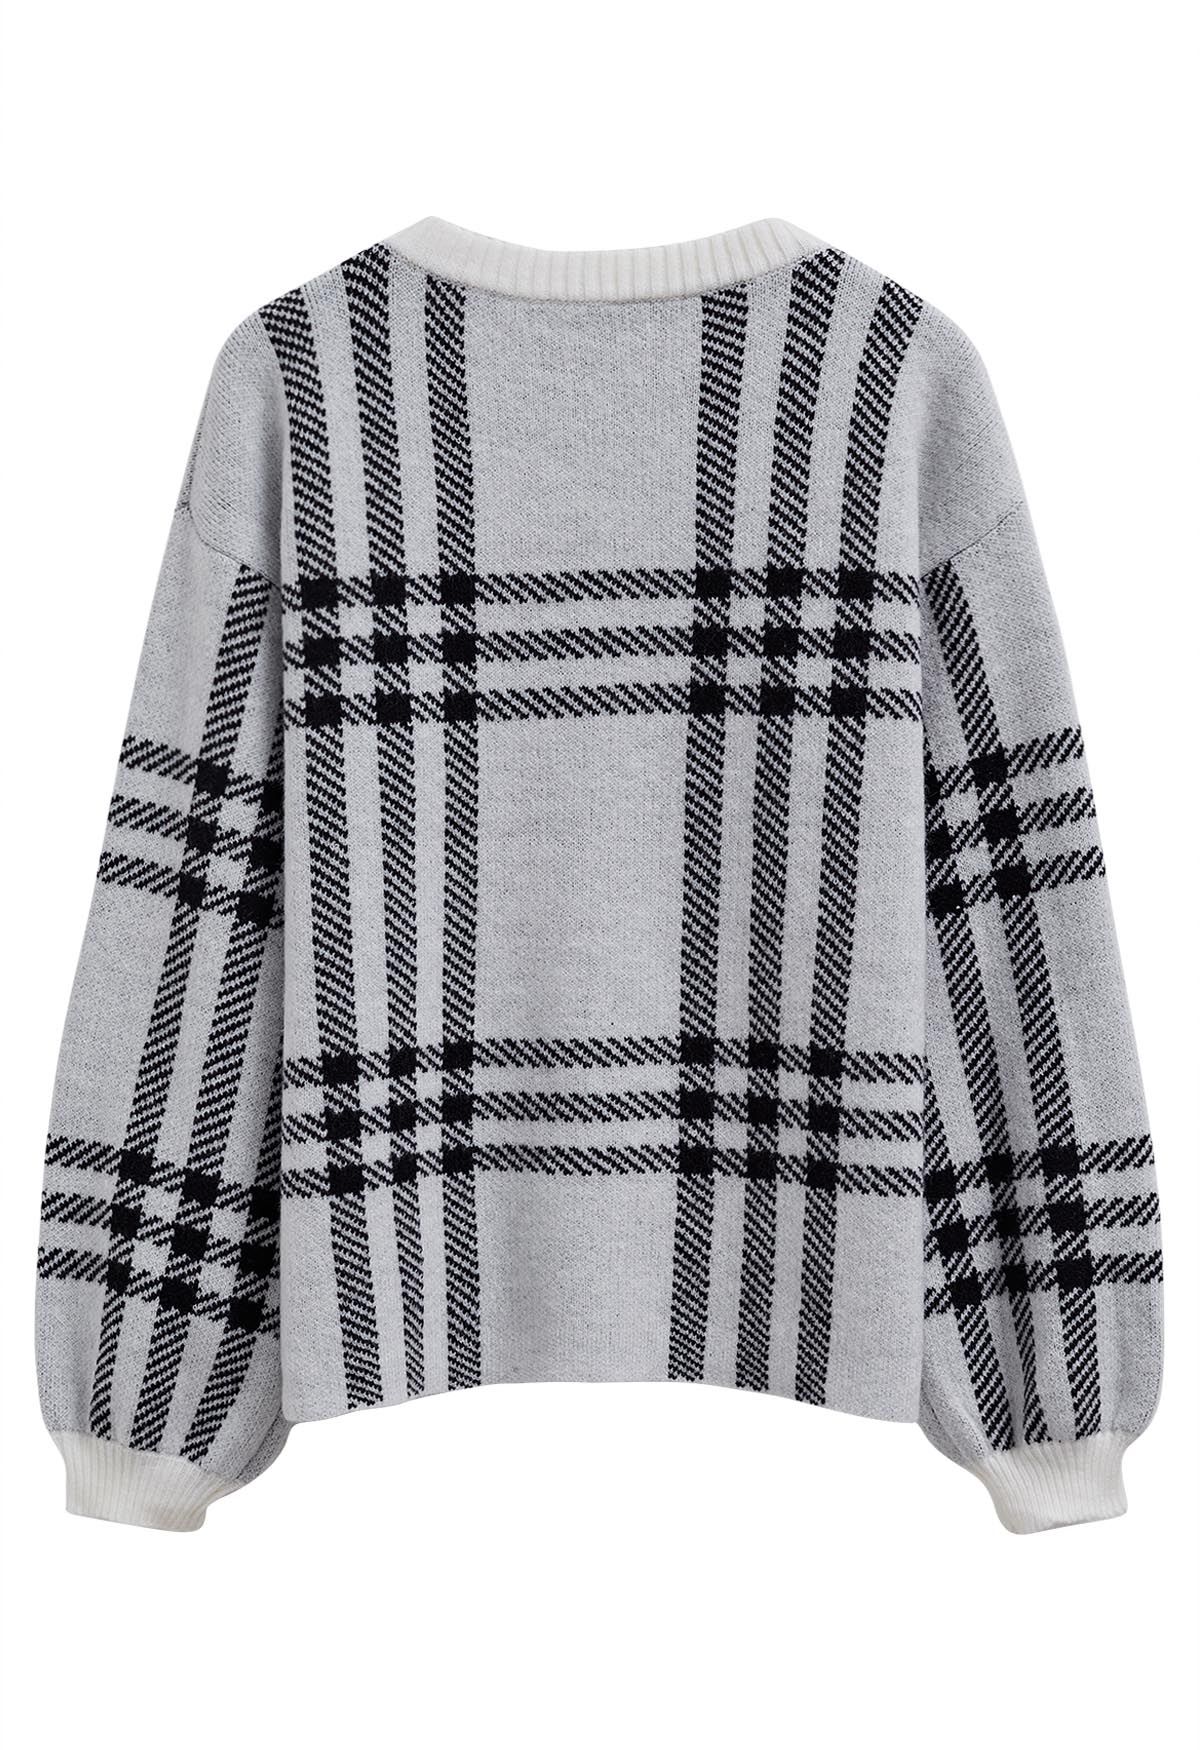 Classic Plaid Round Neck Knit Sweater in Grey - Retro, Indie and Unique ...